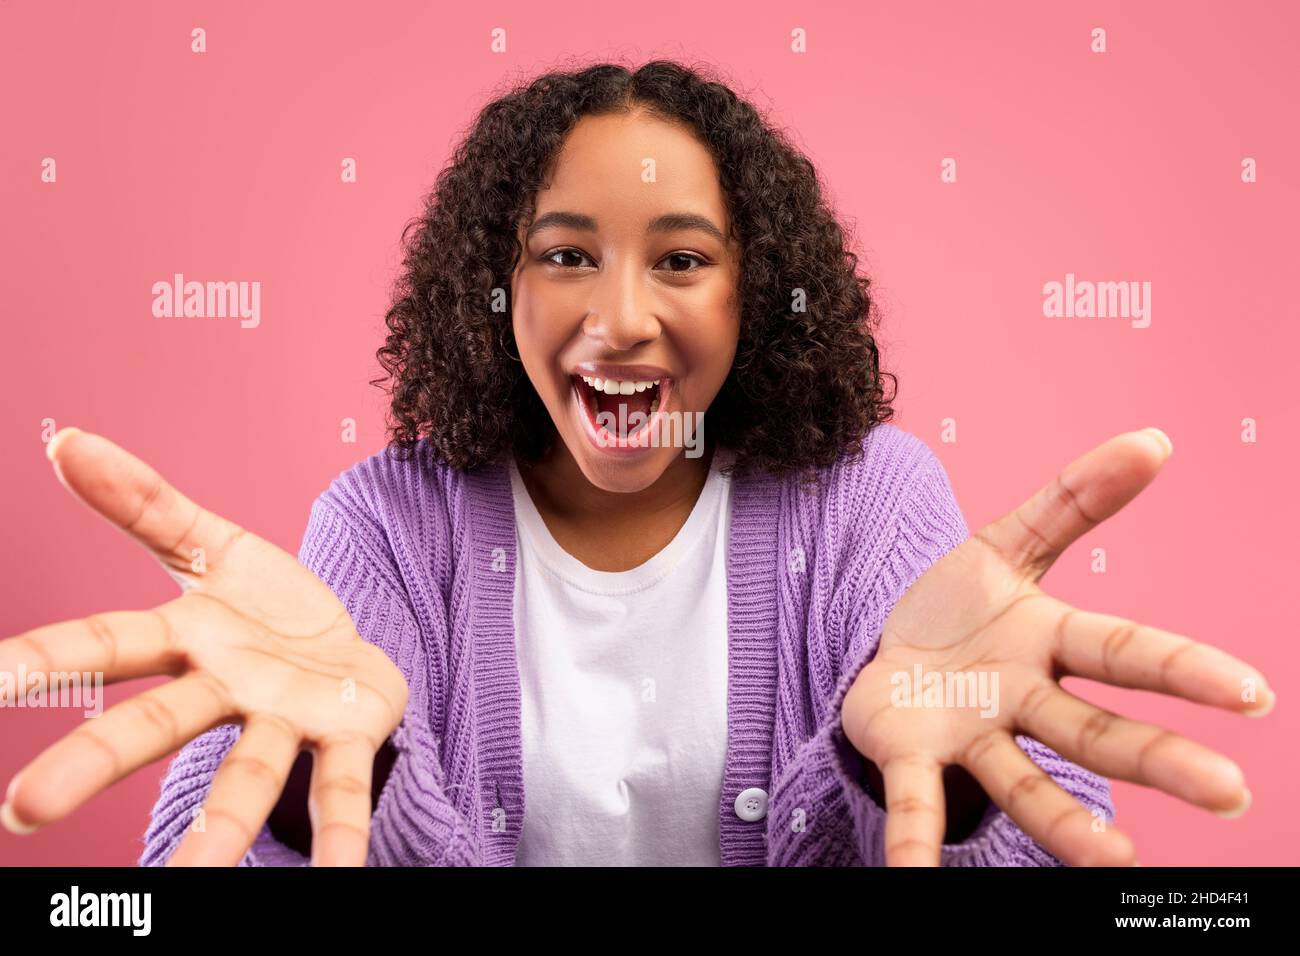 Emotional young African American woman gesturing hands at camera, shouting OMG, celebrating big win on pink background Stock Photo